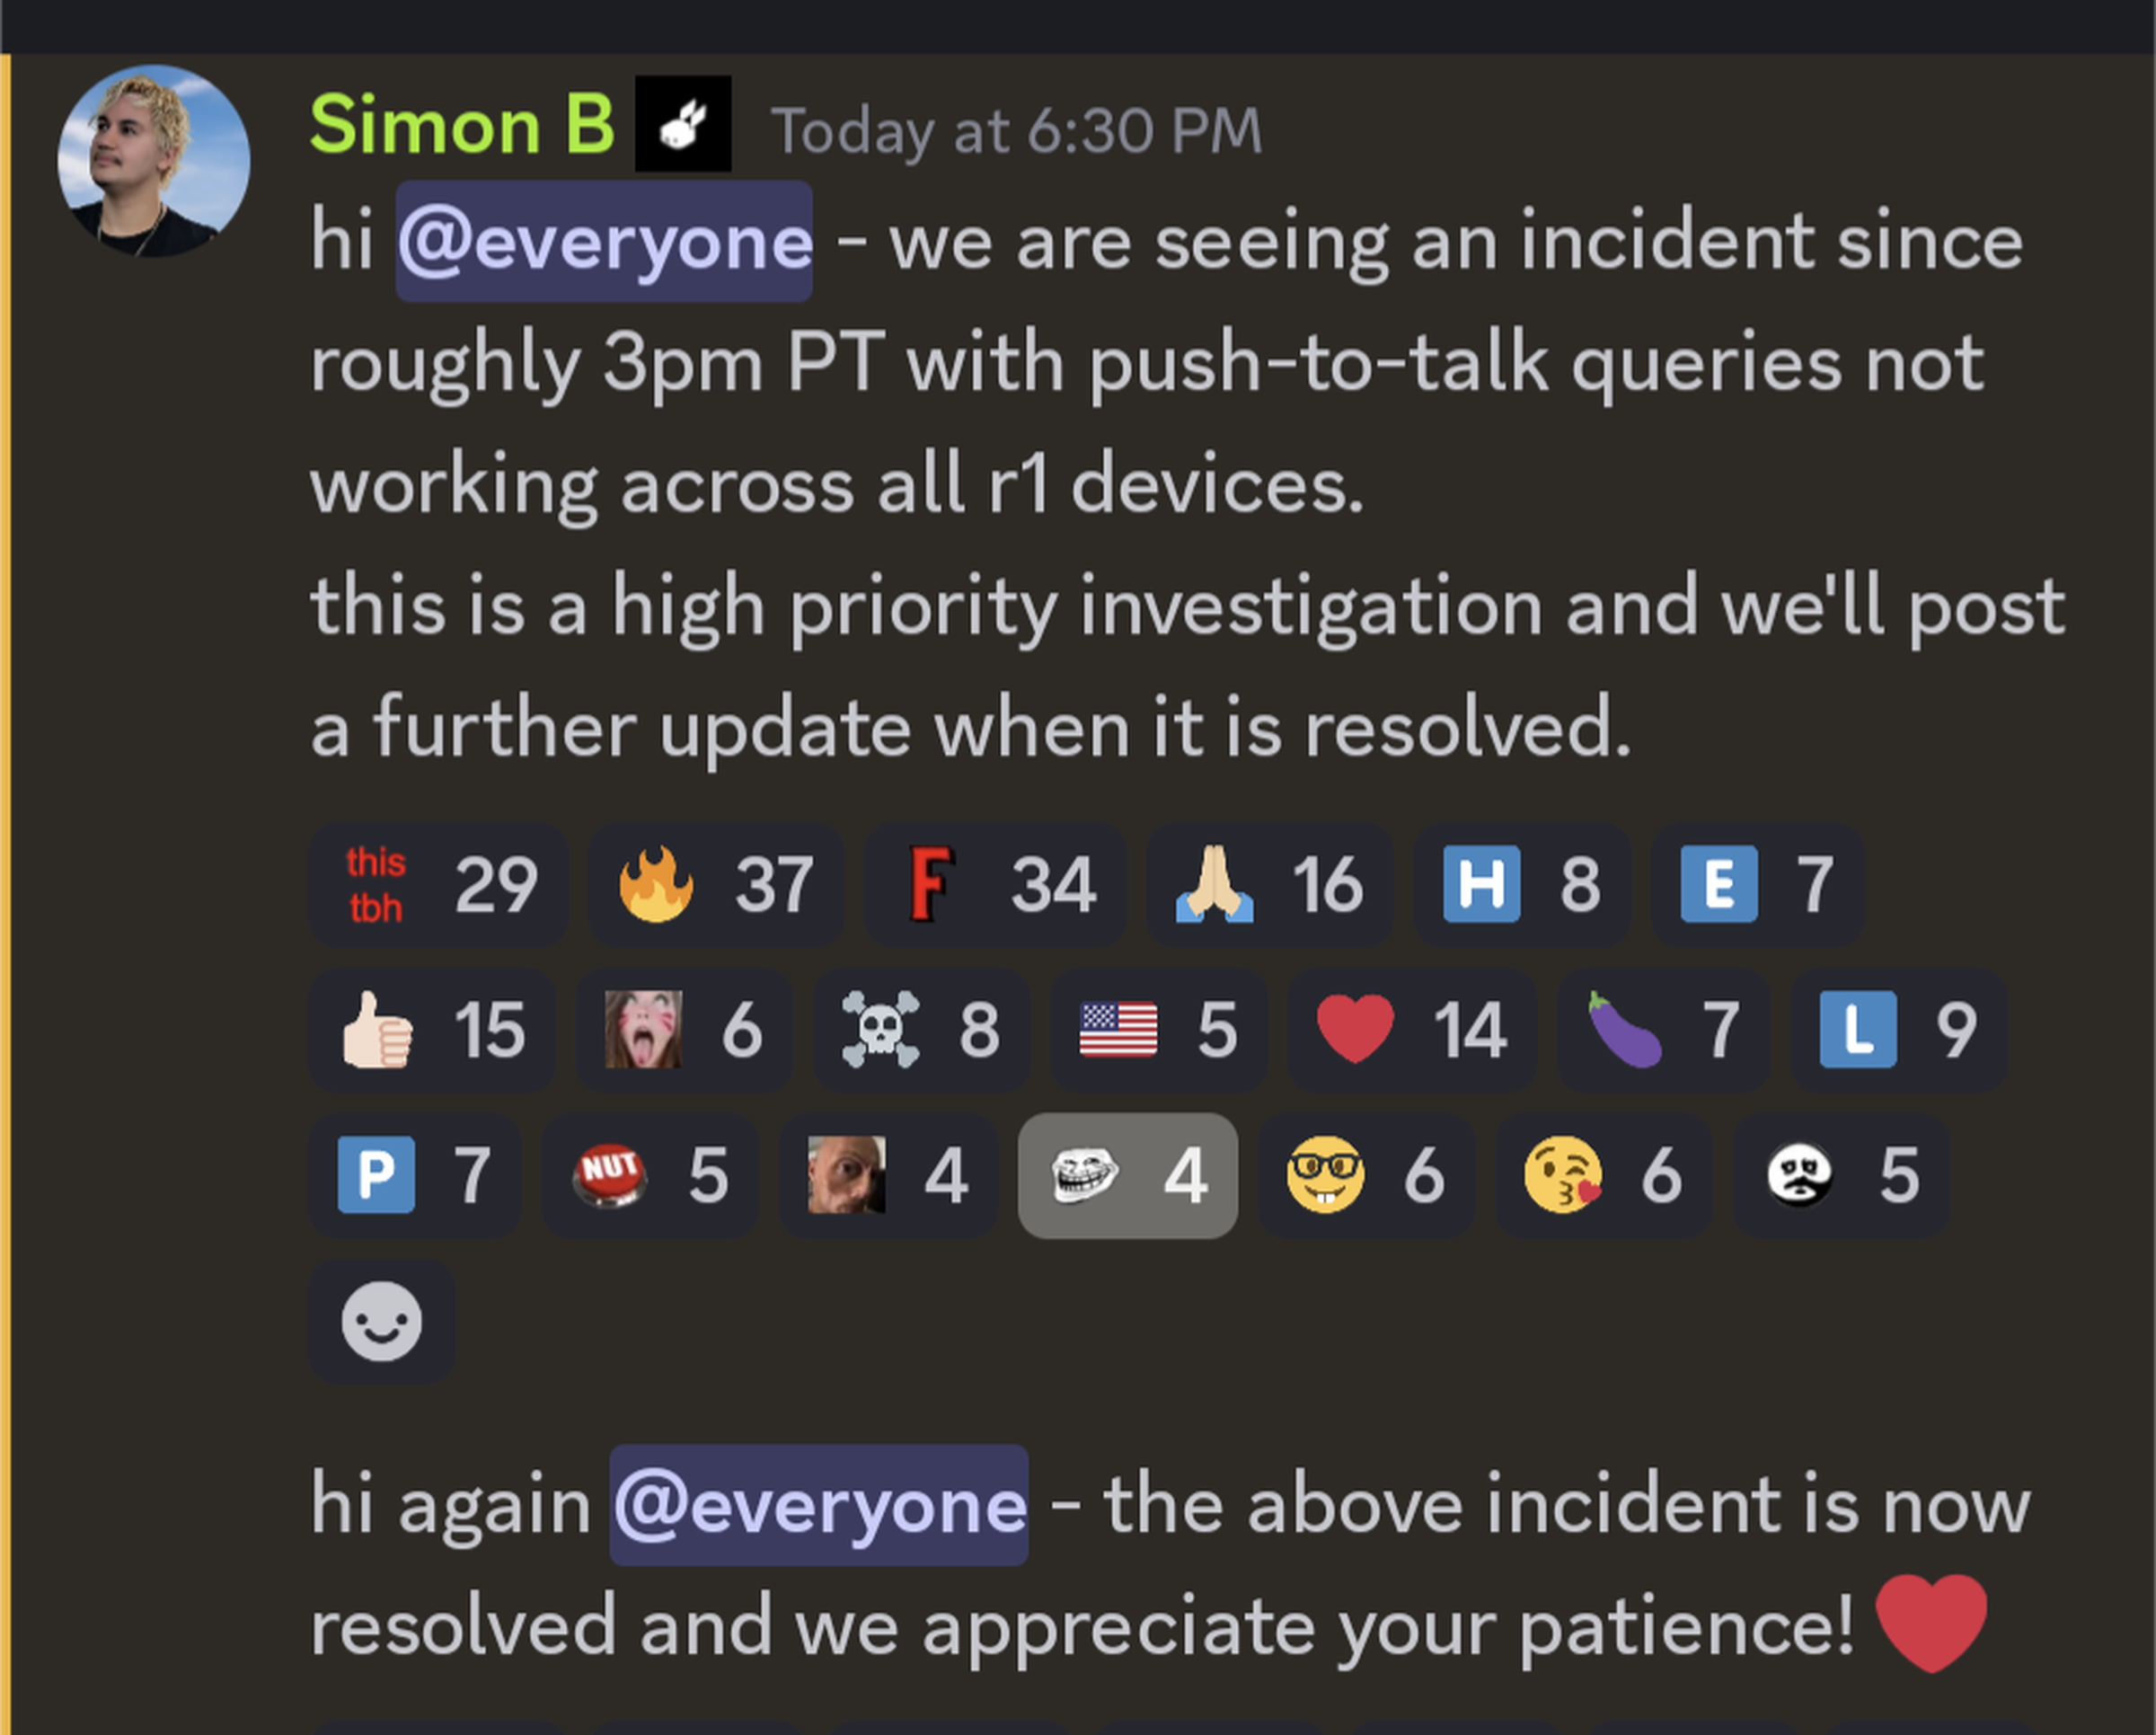 Discord message: “hi @everyone - we are seeing an incident since roughly 3pm PT with push-to-talk queries not working across all r1 devices. this is a high priority investigation and we’ll post a further update when it is resolved.”